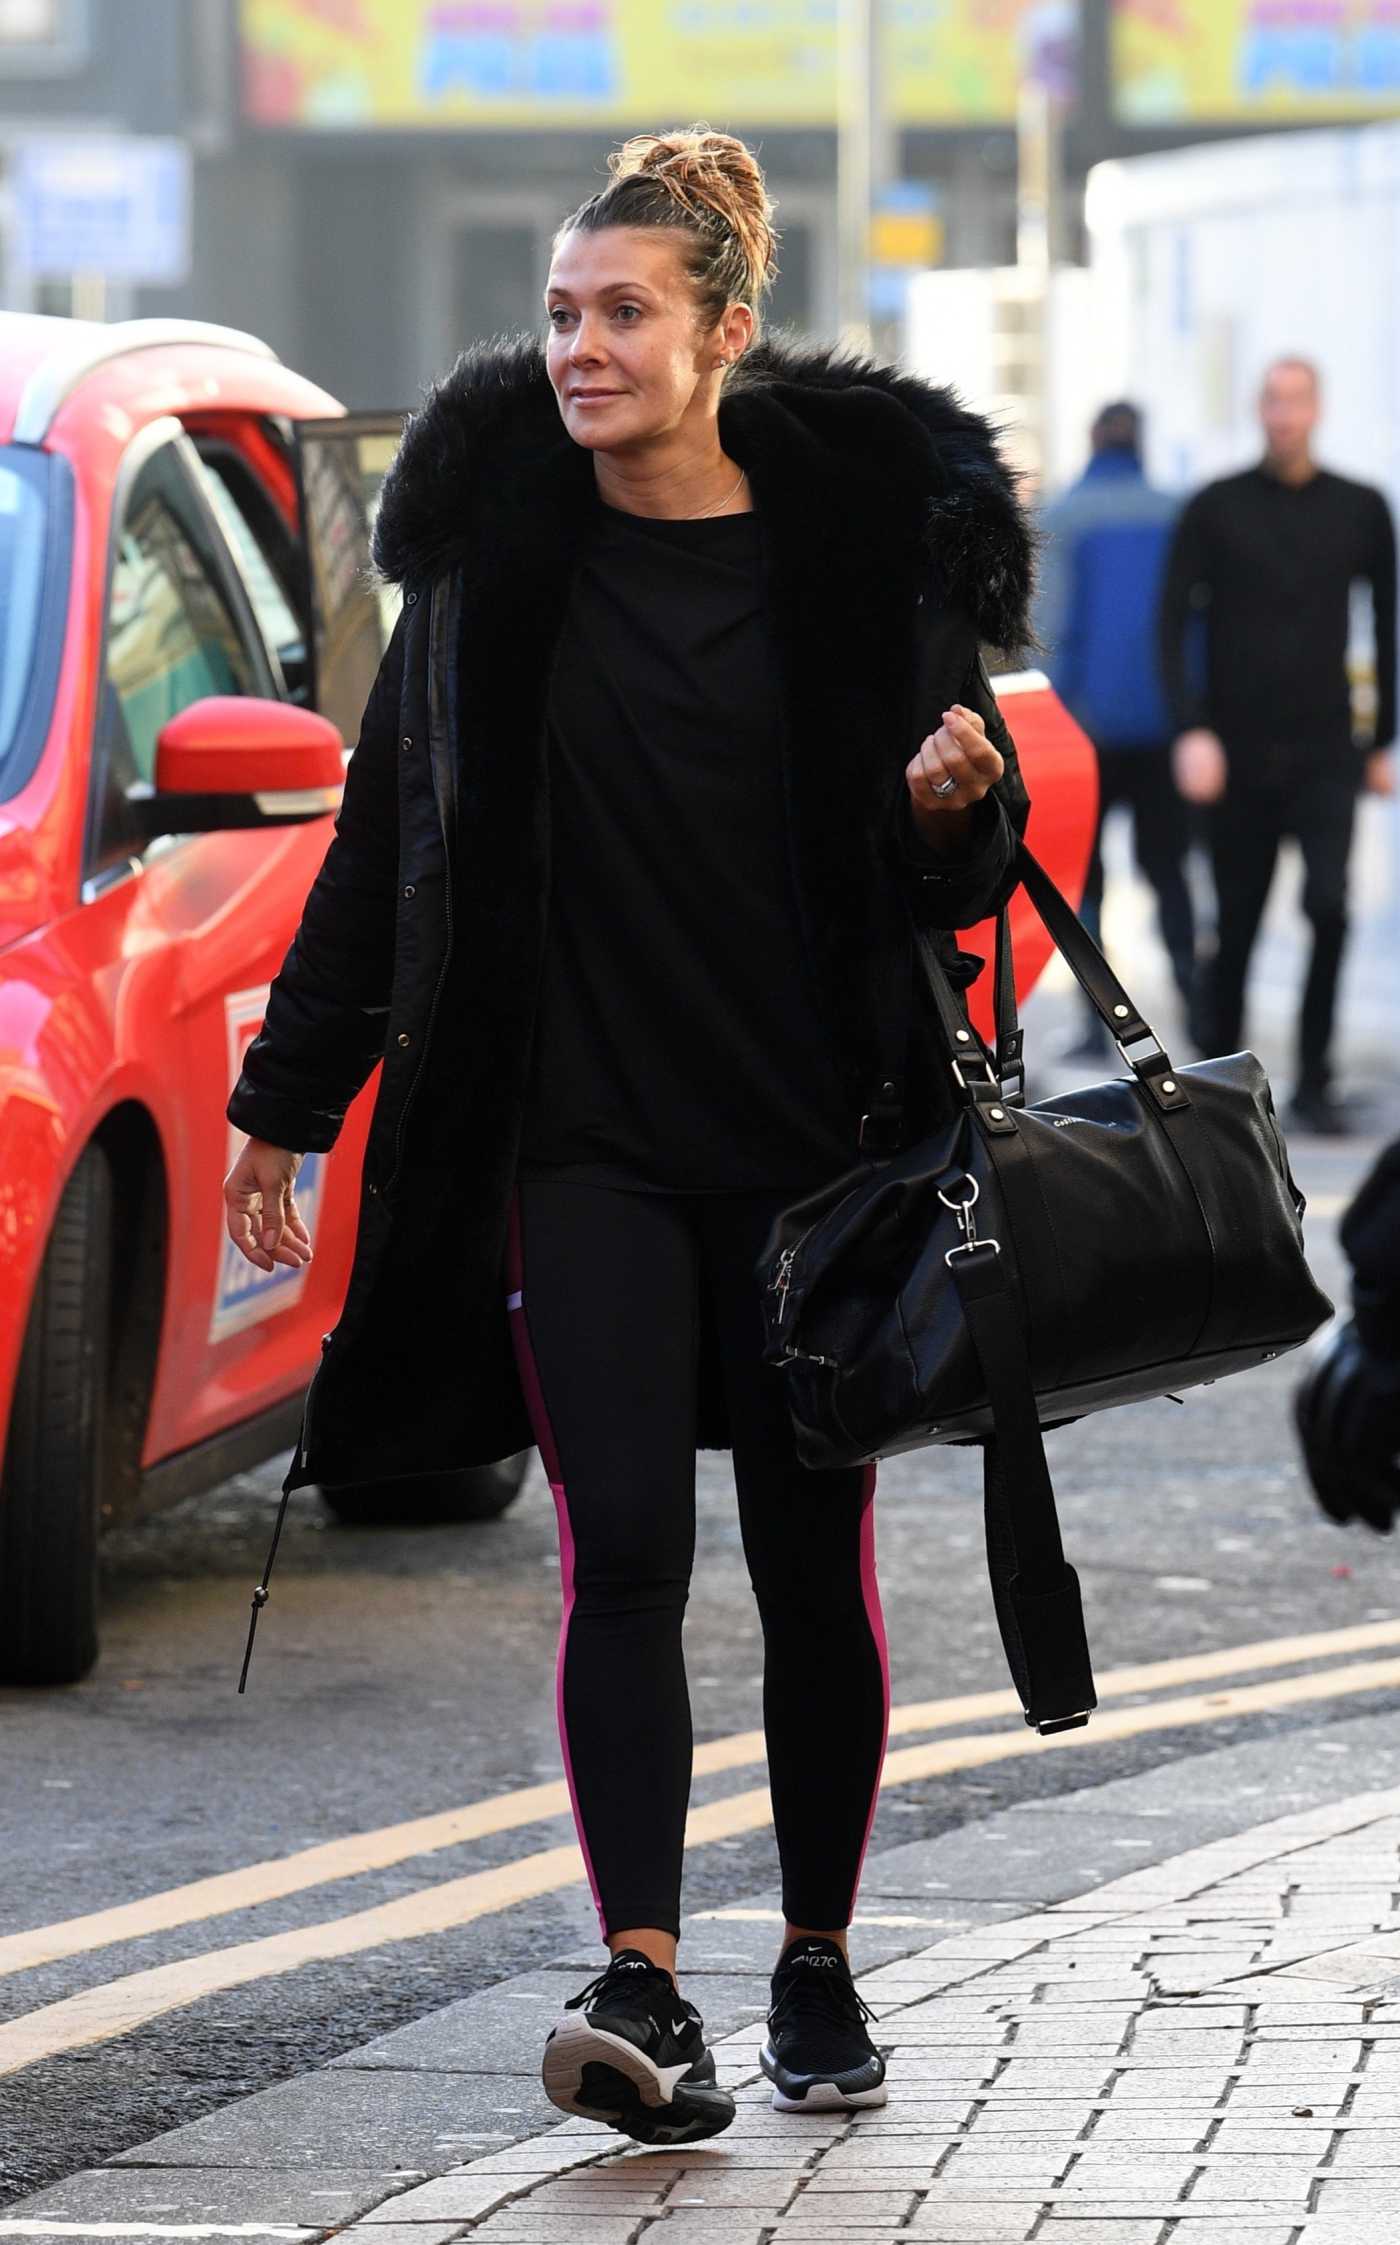 Kym Marsh in a Black Outfit Arrives at Blackpool Tower in London 11/18/2022